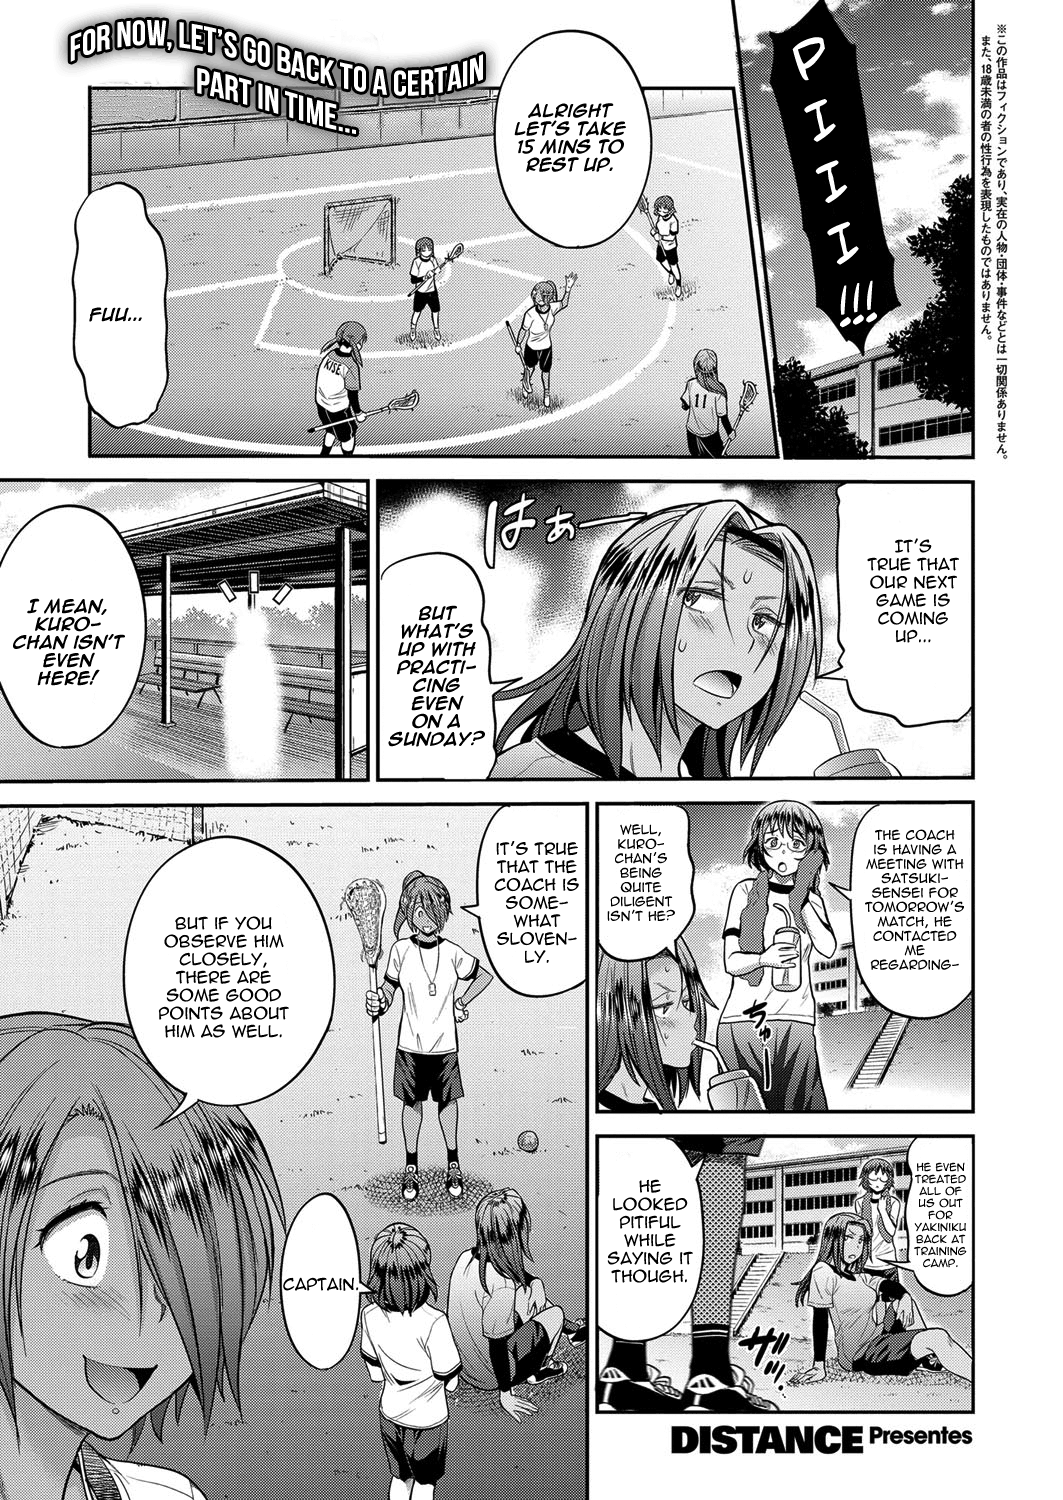 [DISTANCE] Joshi Lacu! - Girls Lacrosse Club ~2 Years Later~ Ch. 1.5 (COMIC ExE 06) [English] [TripleSevenScans] [Digital] [DISTANCE] じょしラク！～2Years Later～ 第1.5話 (コミック エグゼ 06) [英訳] [DL版]